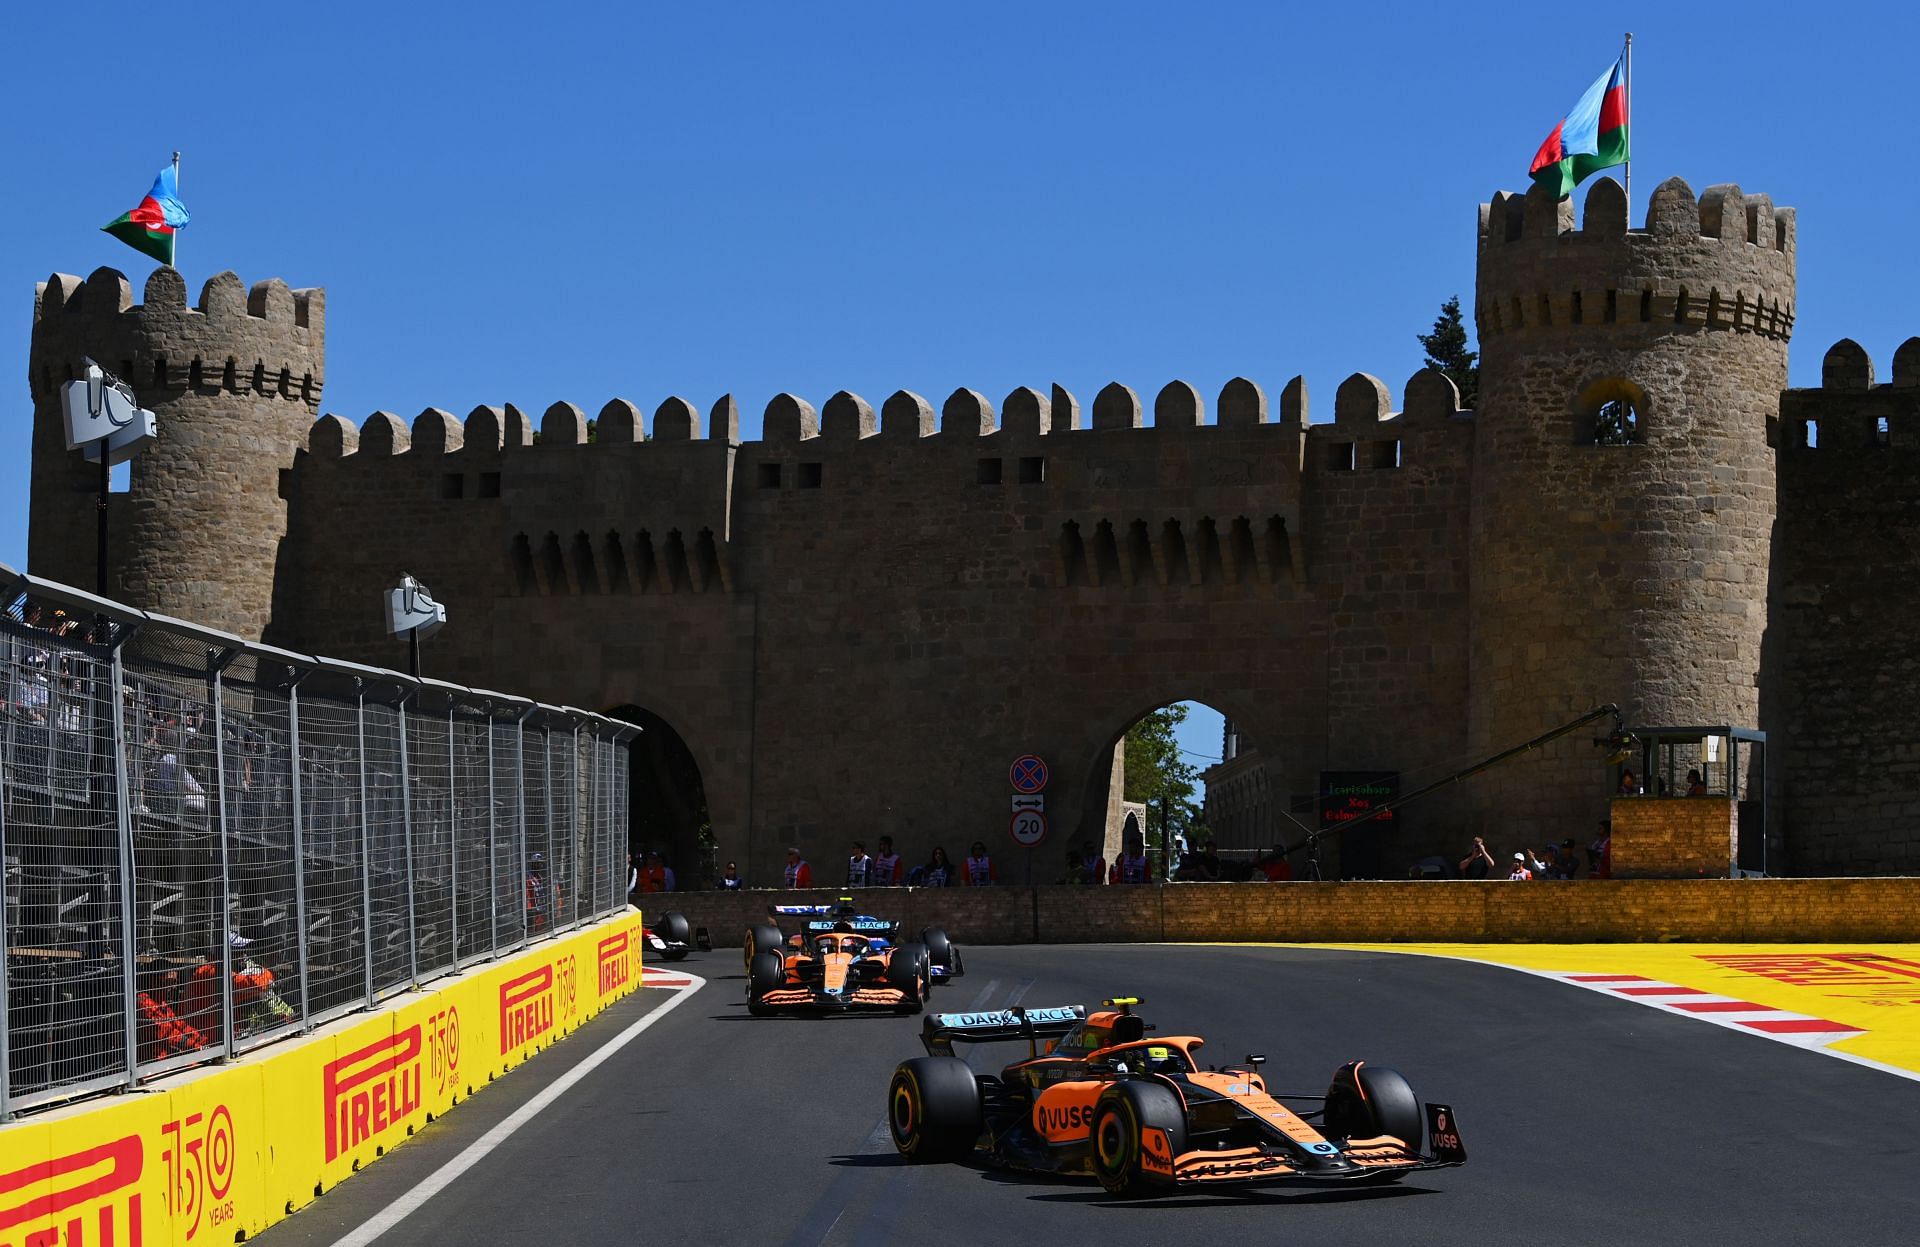 McLaren had ordered both the drivers not to overtake each other at different stages of the Baku race